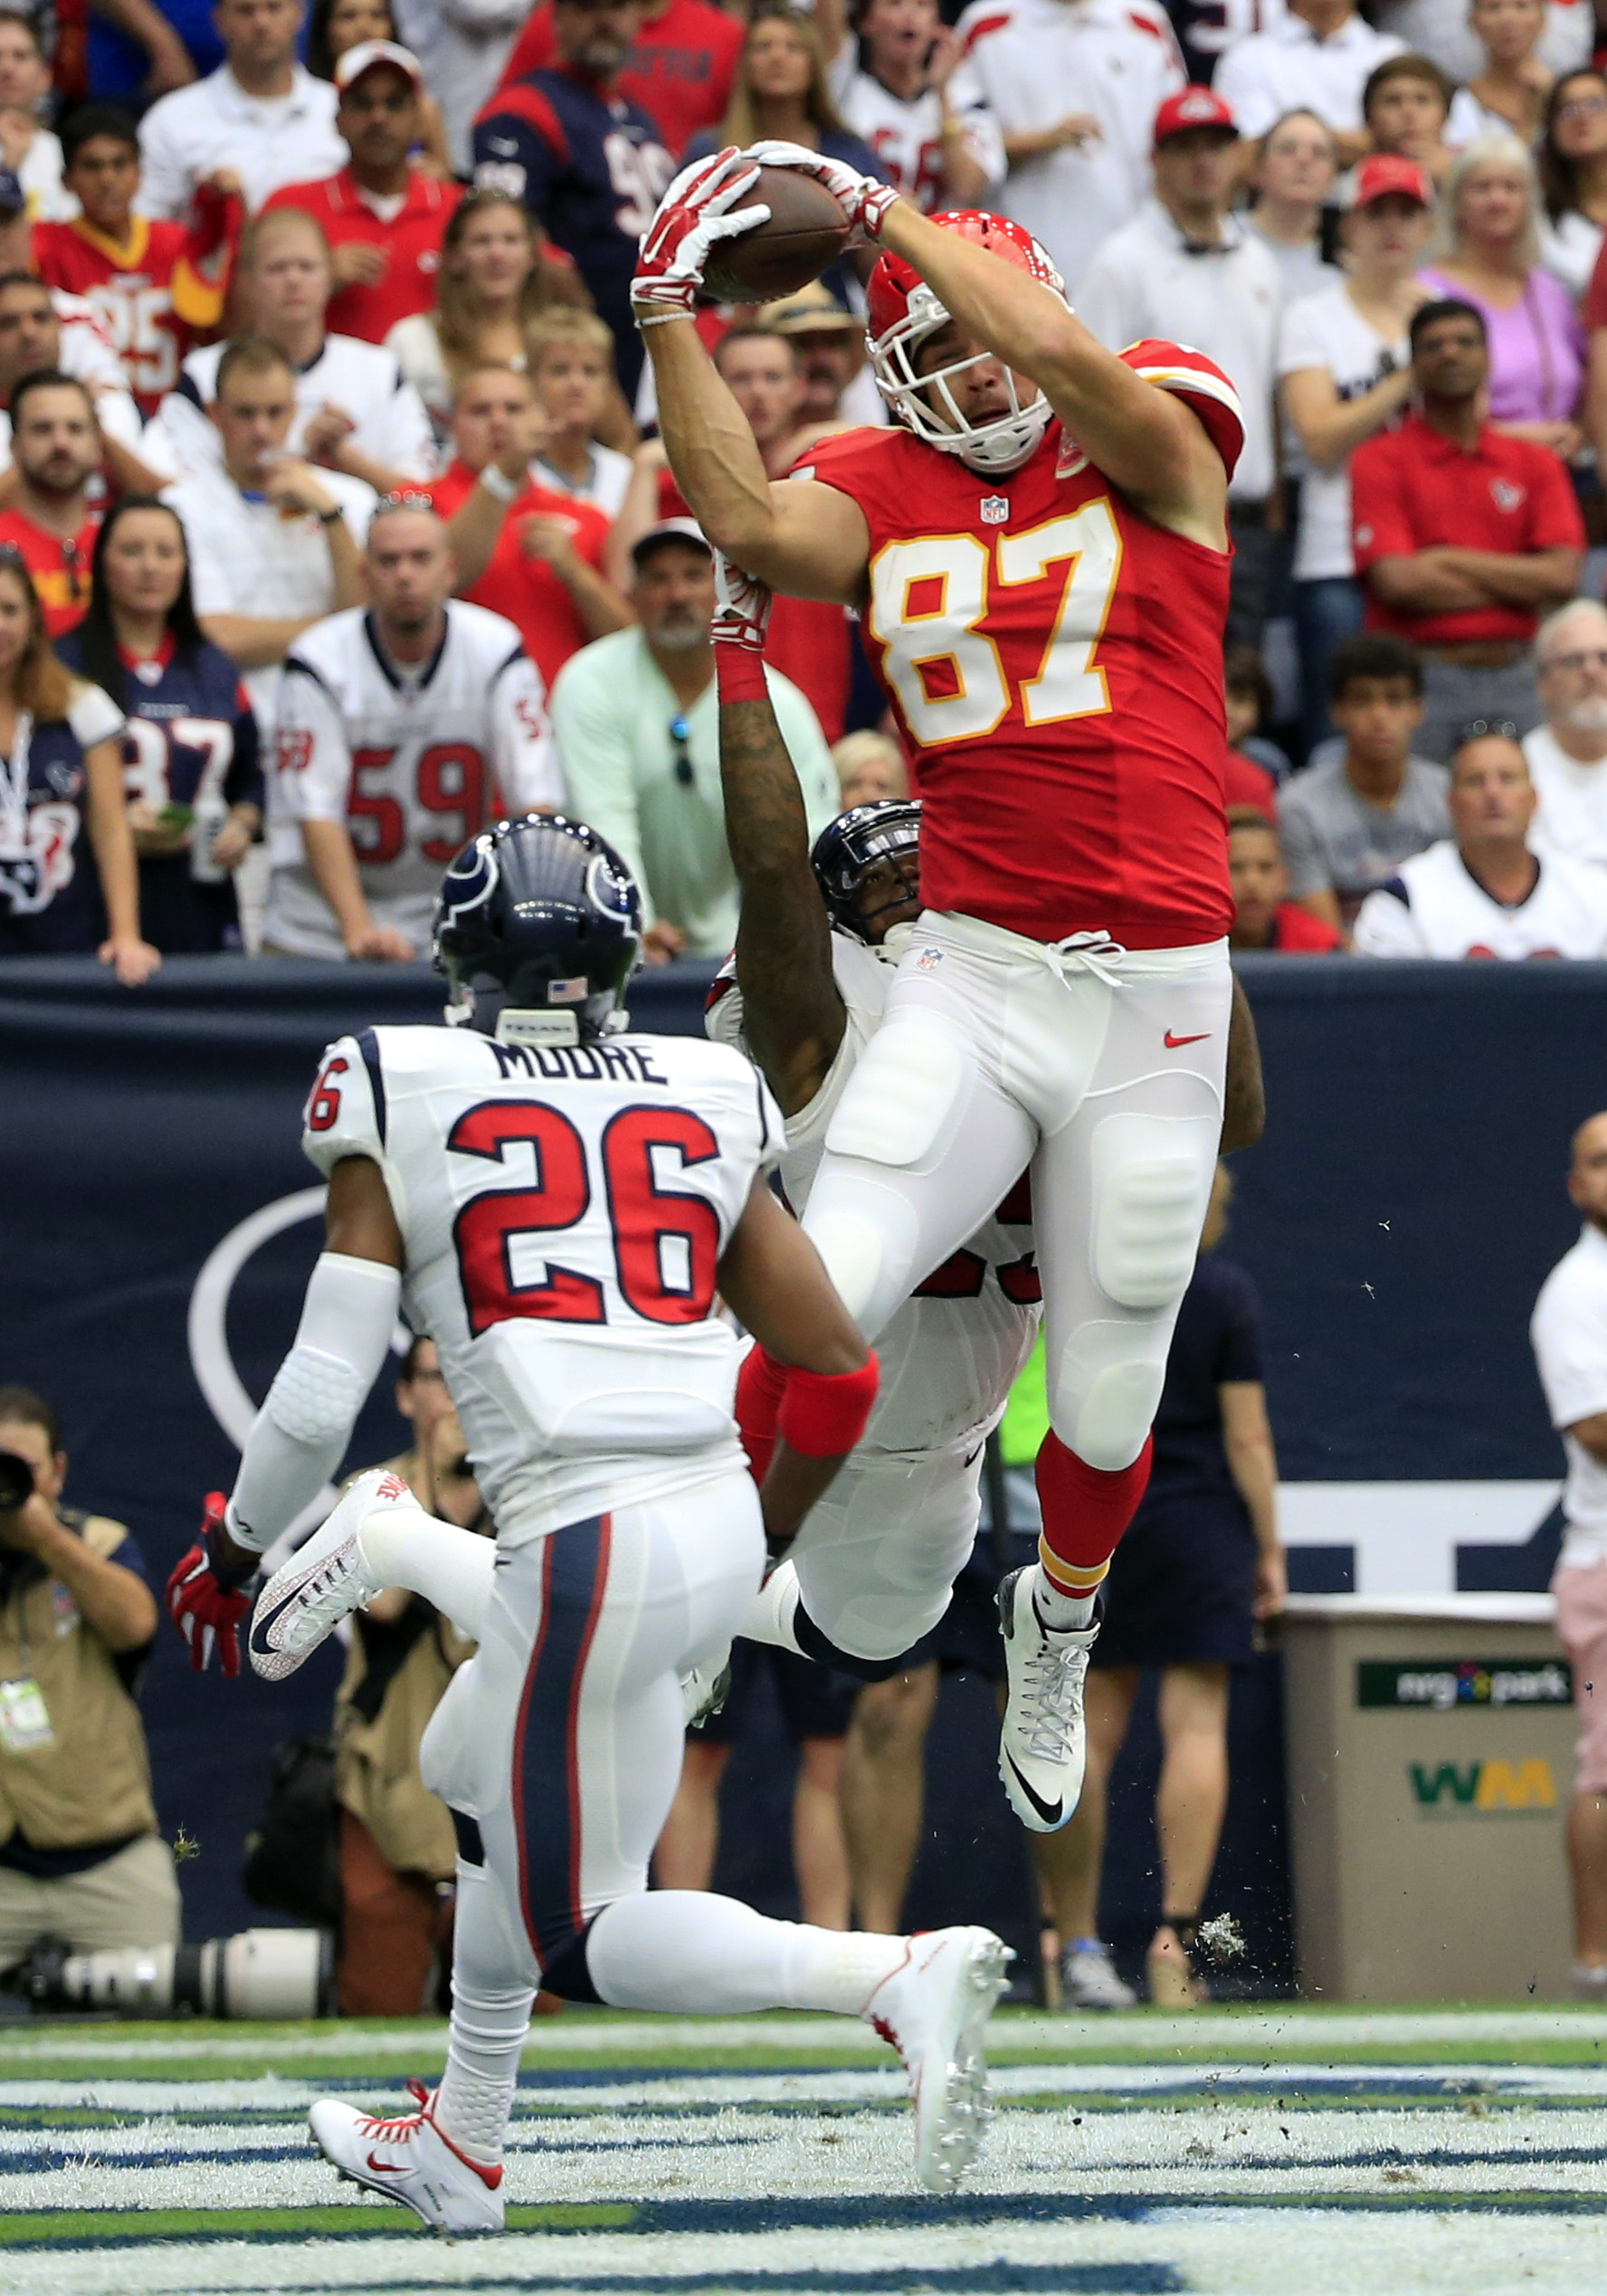 The first half was all about Travis Kelce.